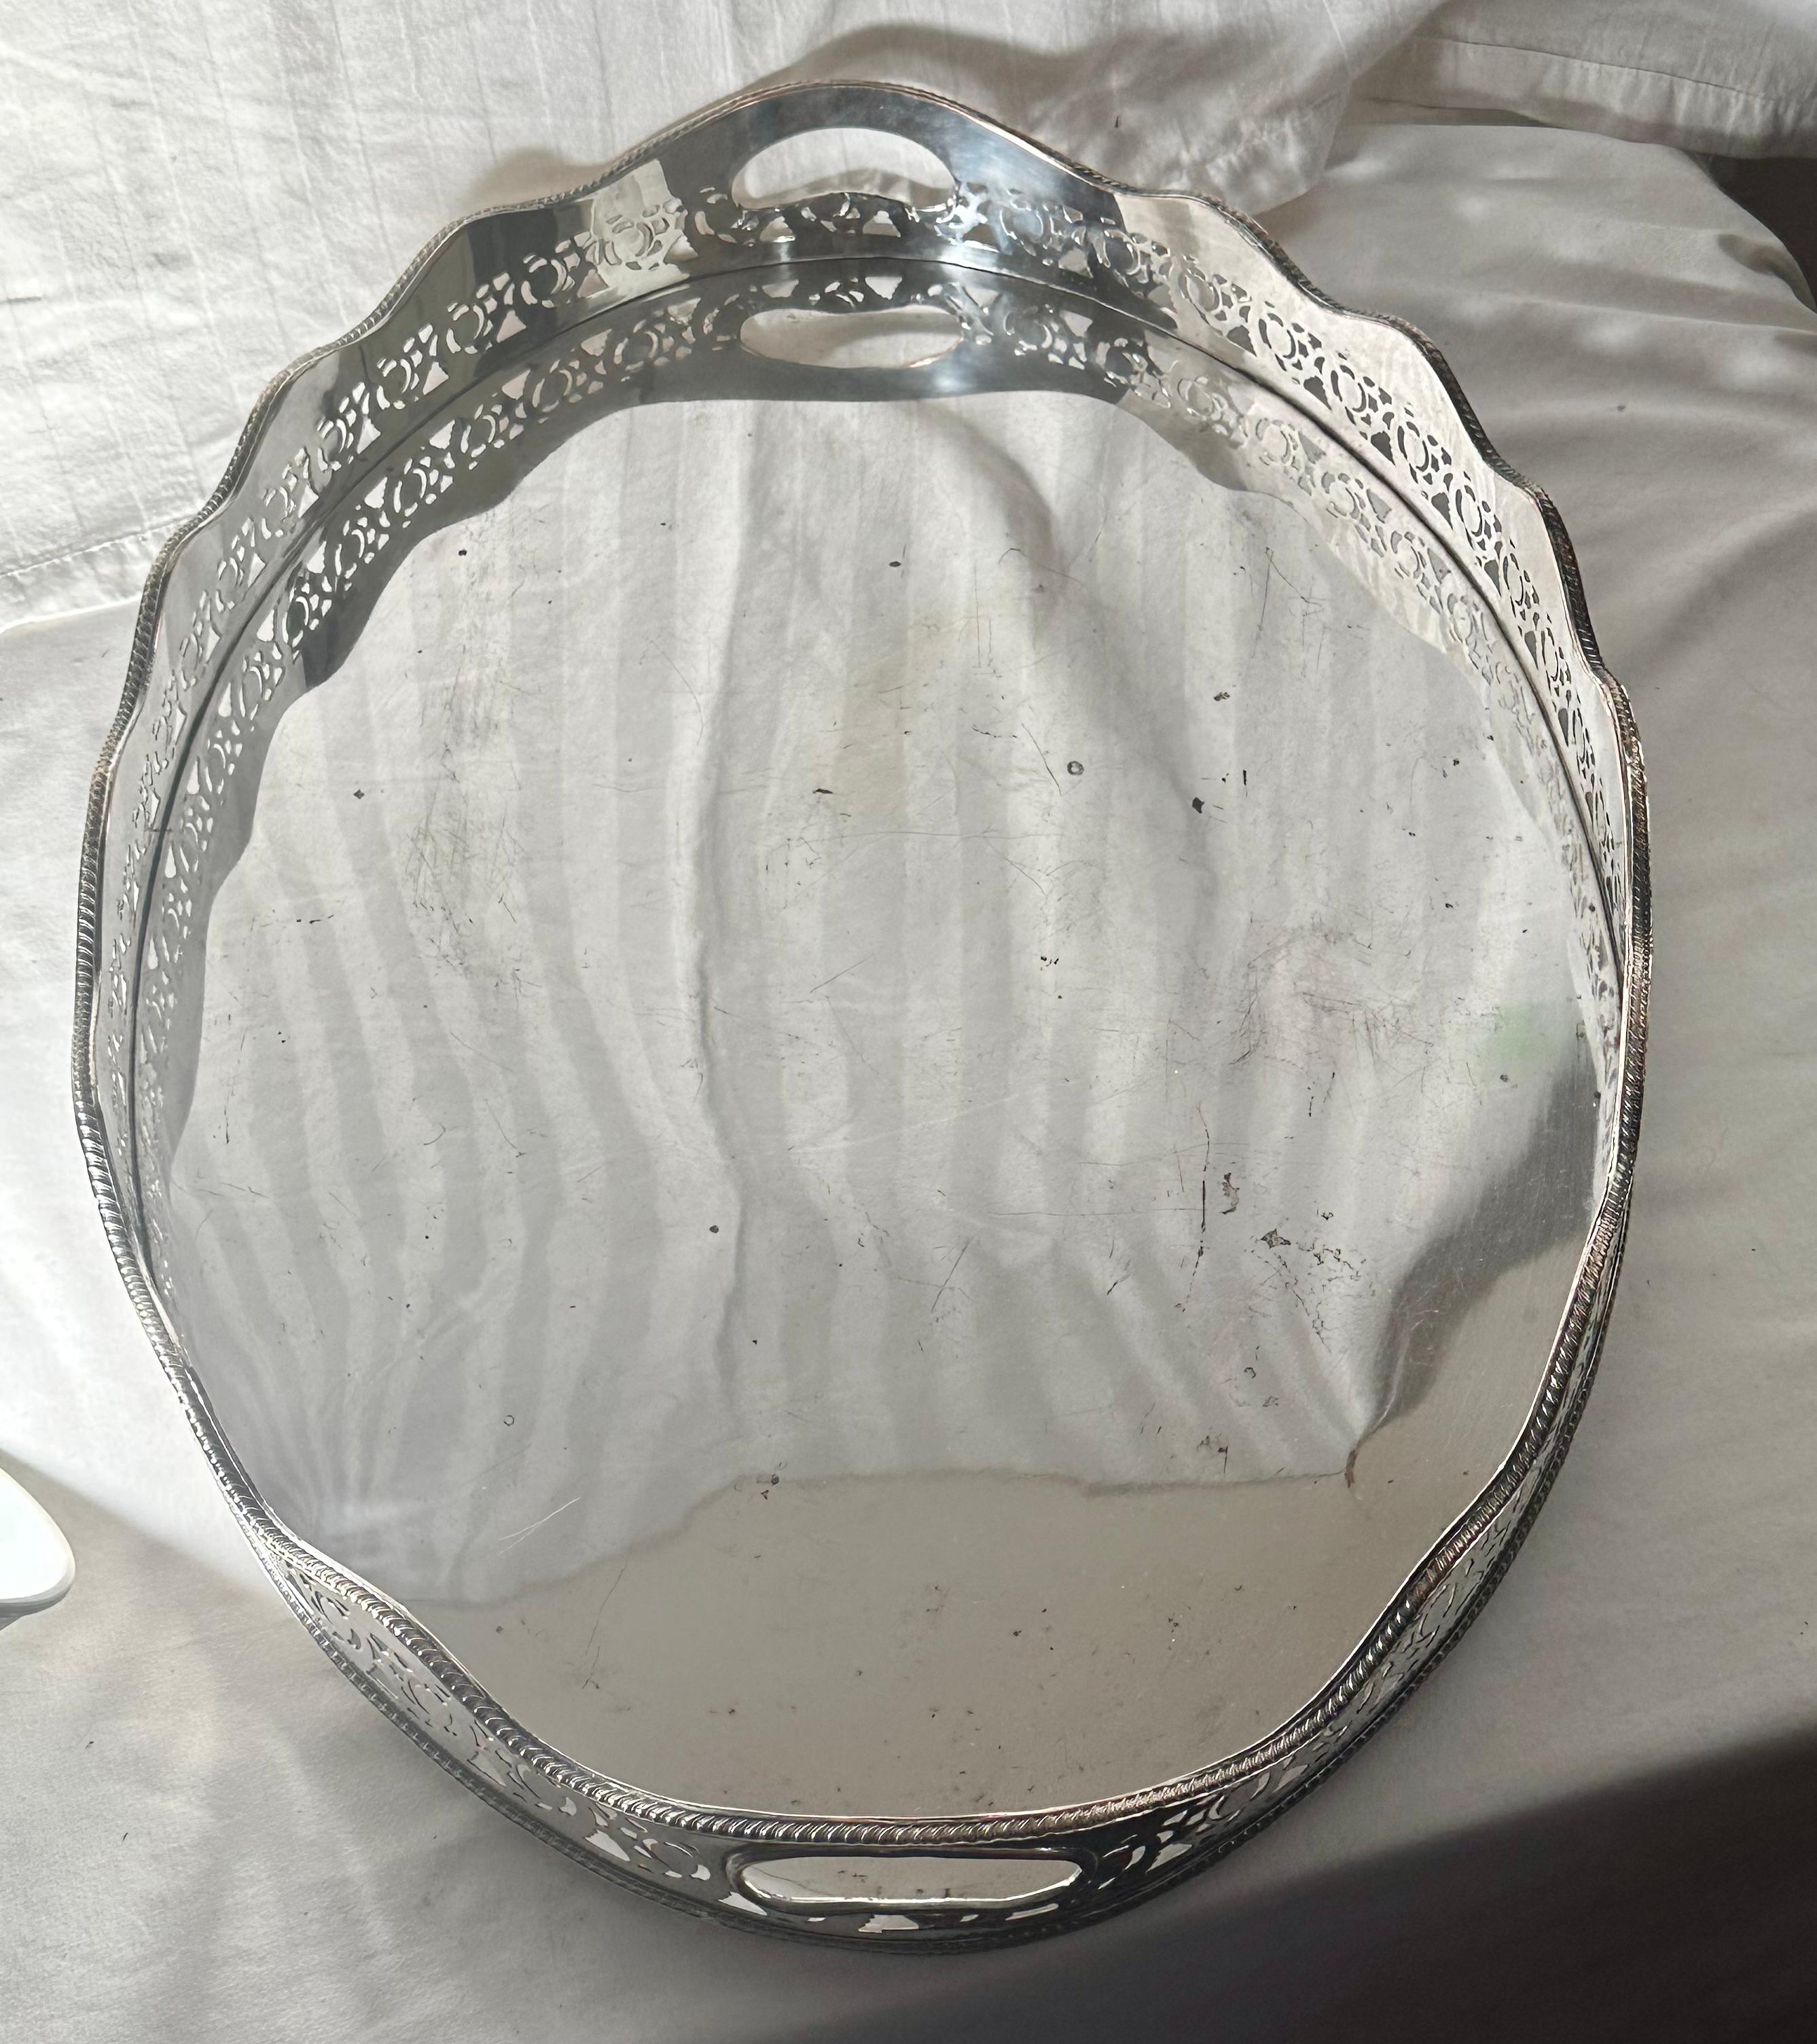 Large Oval Edwardian Gallery Butler Tray Hallmarked Silver Plate.

Large oval Edwardian butler, serving tray features a broad pierced gallery with scalloped edges and inset handles.  It sits on 4 knob feet.  English Silver plate on copper Hallmark